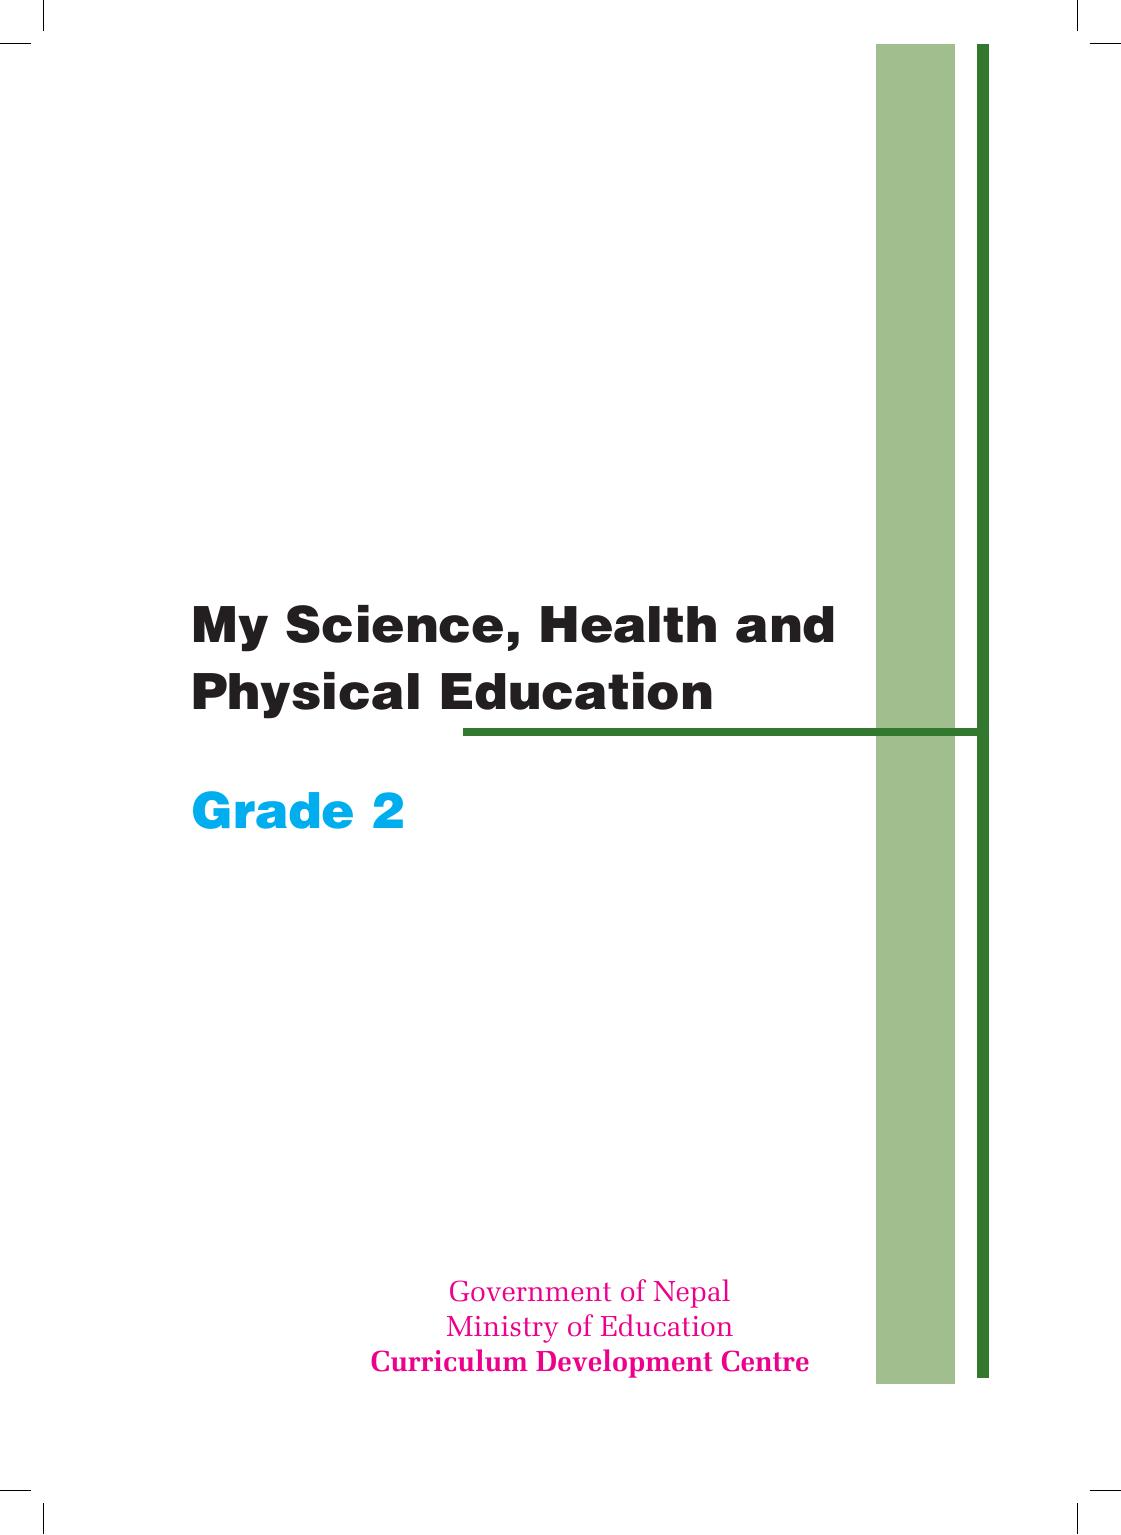 CDC 2075 - My Science, Health and Physical Education Grade 2